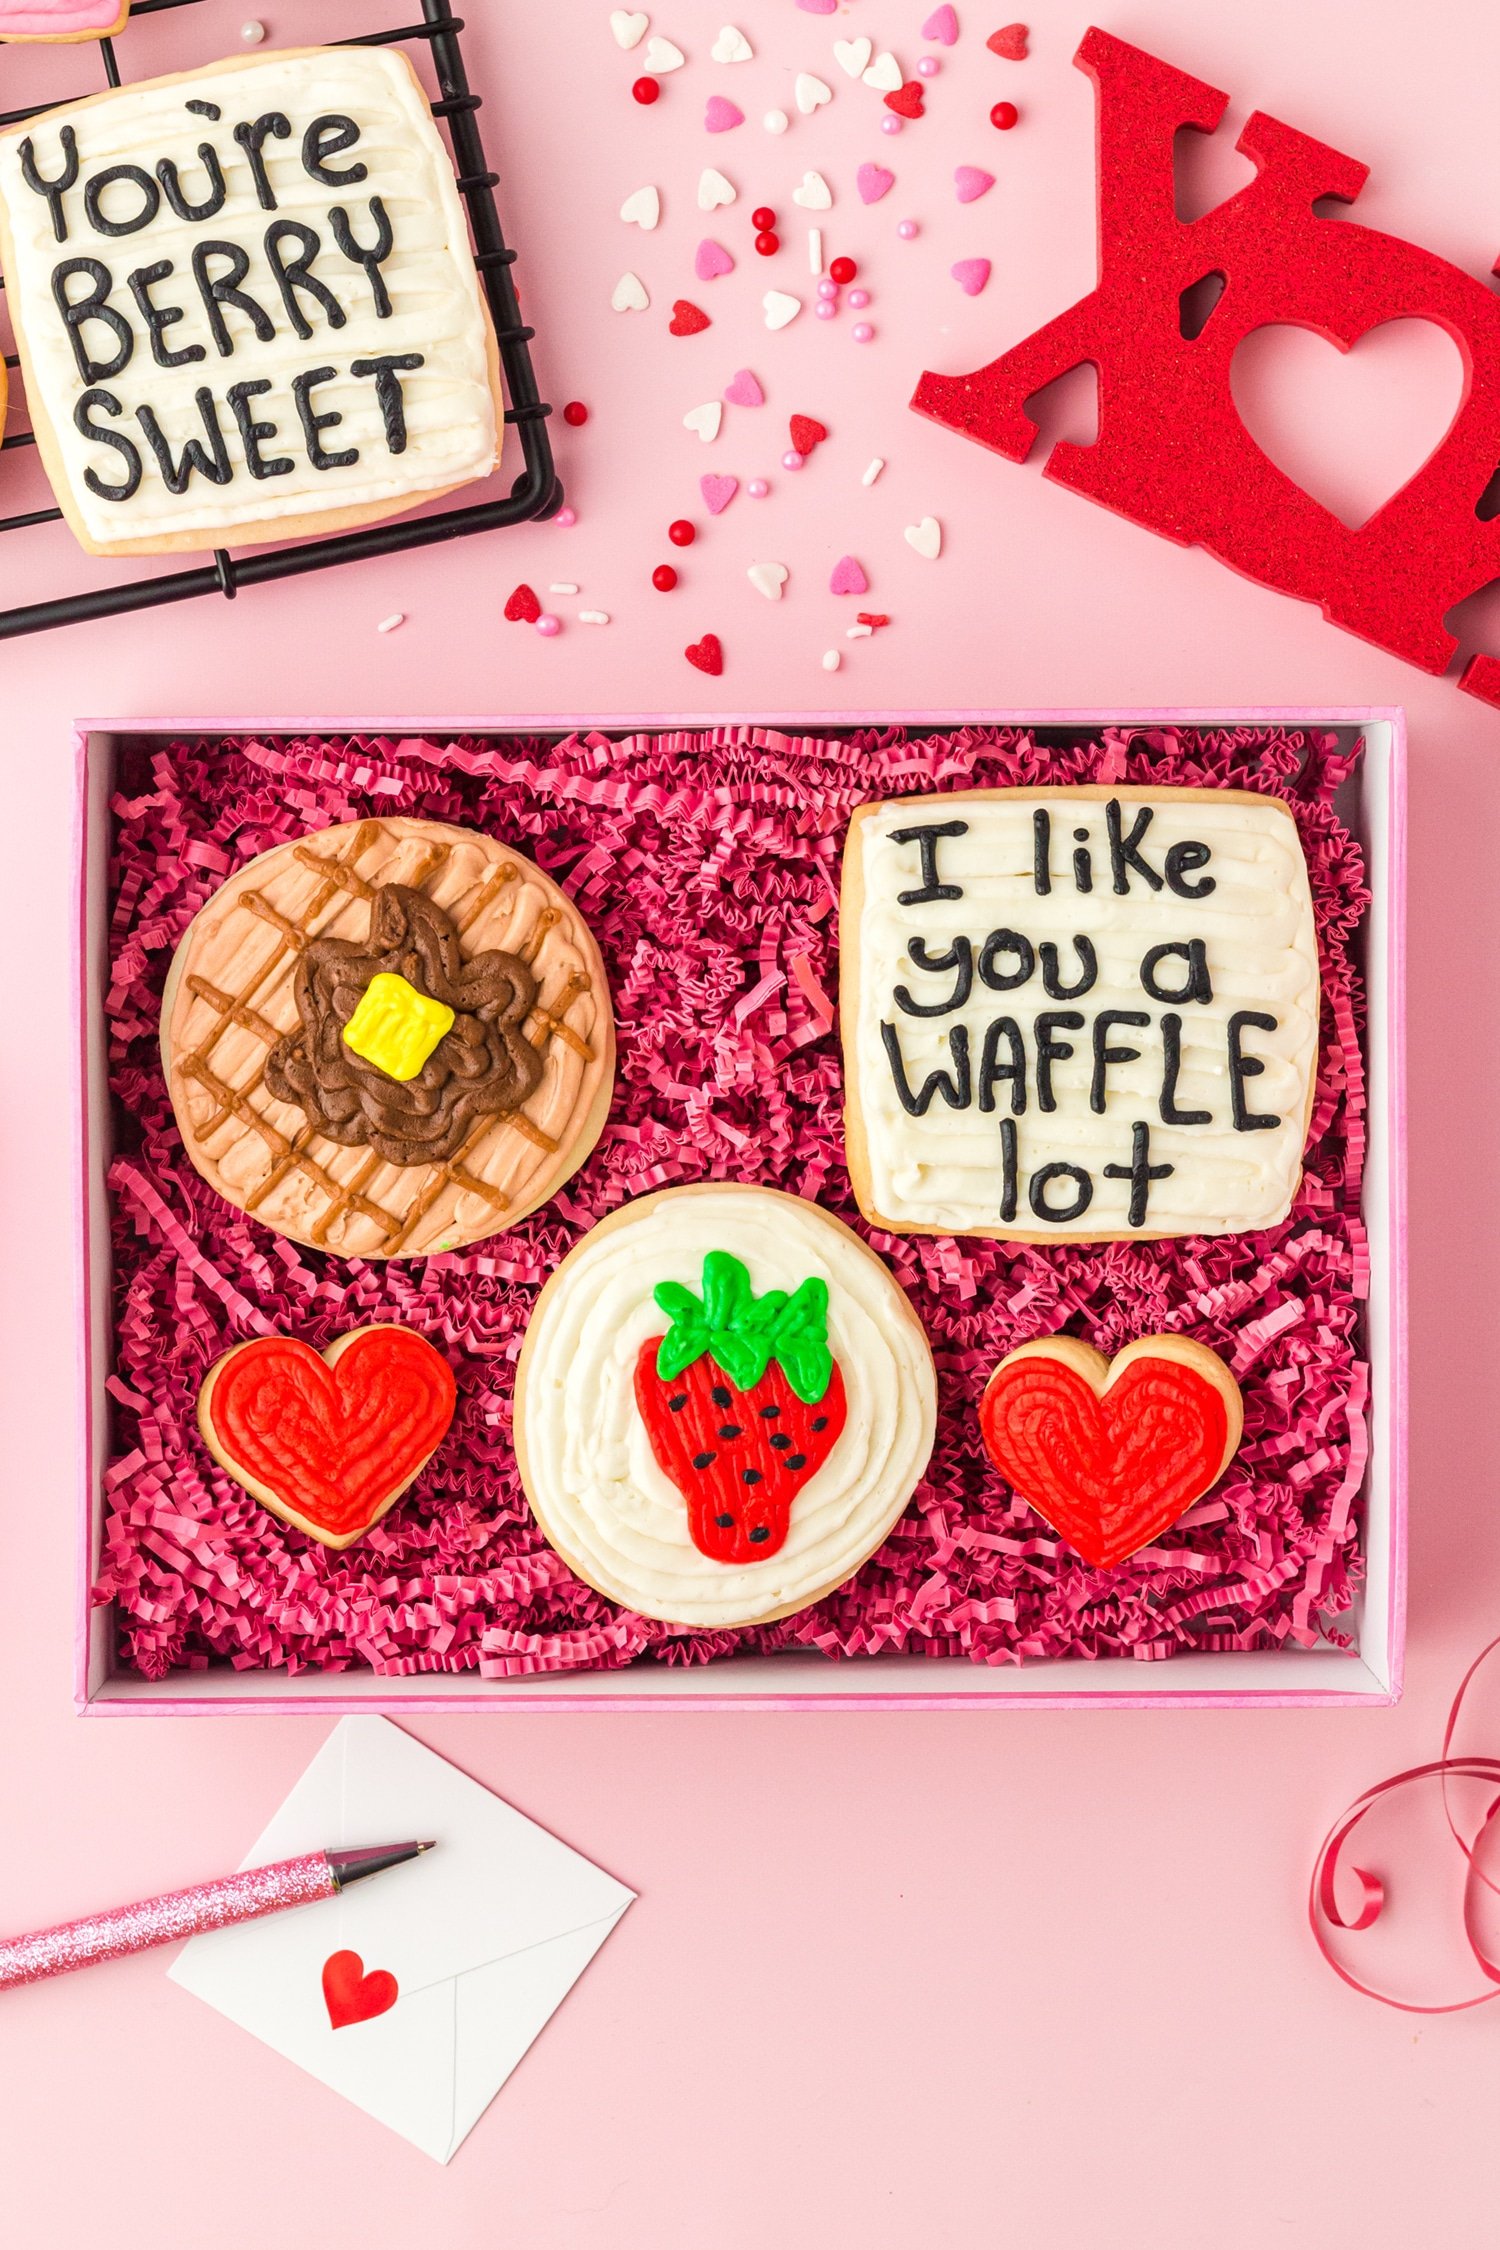 Set of adorable Valentine's Day sugar cookies in waffle and berry designs in a decorative pink box